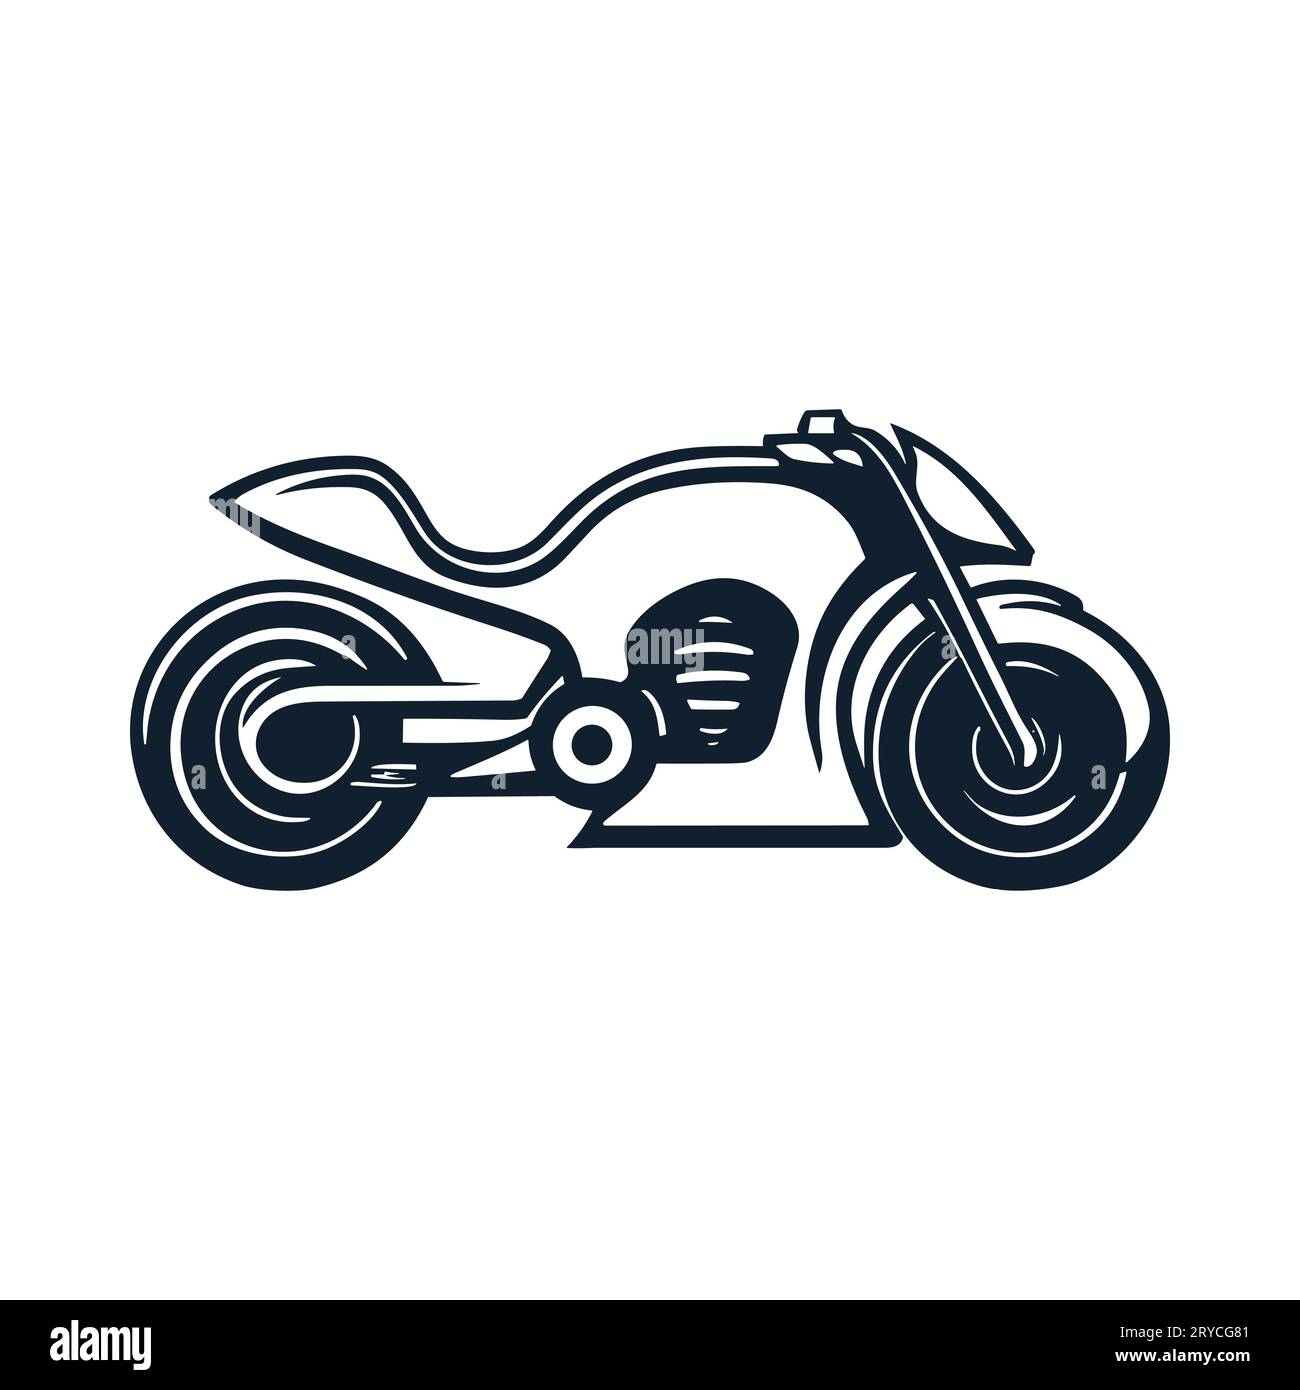 Road motorcycle, abstract vector silhouette, motor sport logo Stock Vector